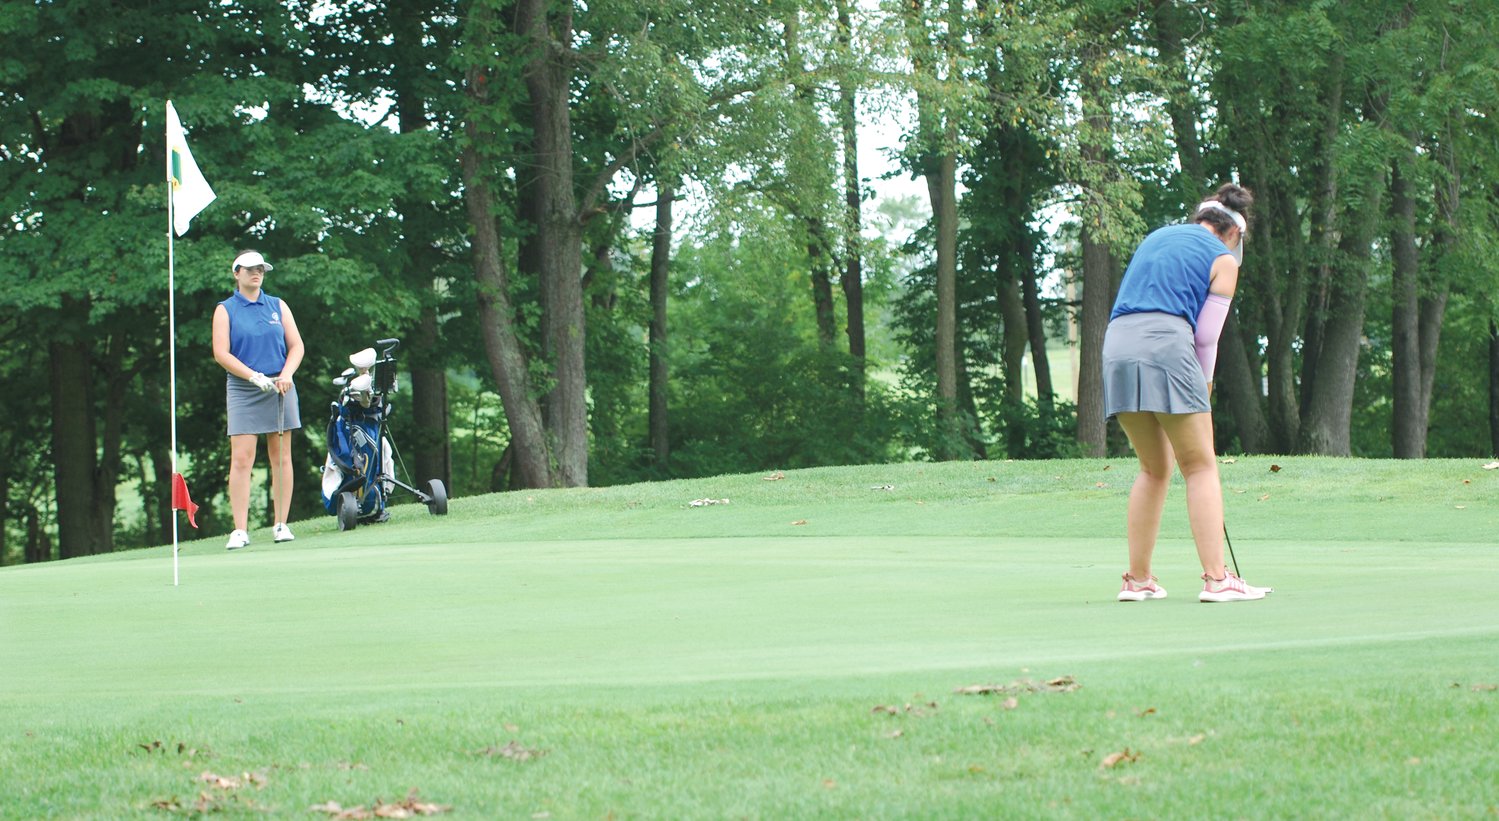 Crawfordsville's Bailey Mittal putts on the No. 17 green at Crawfordsville Municipal Golf Course on Thursday. The senior shot a 44.